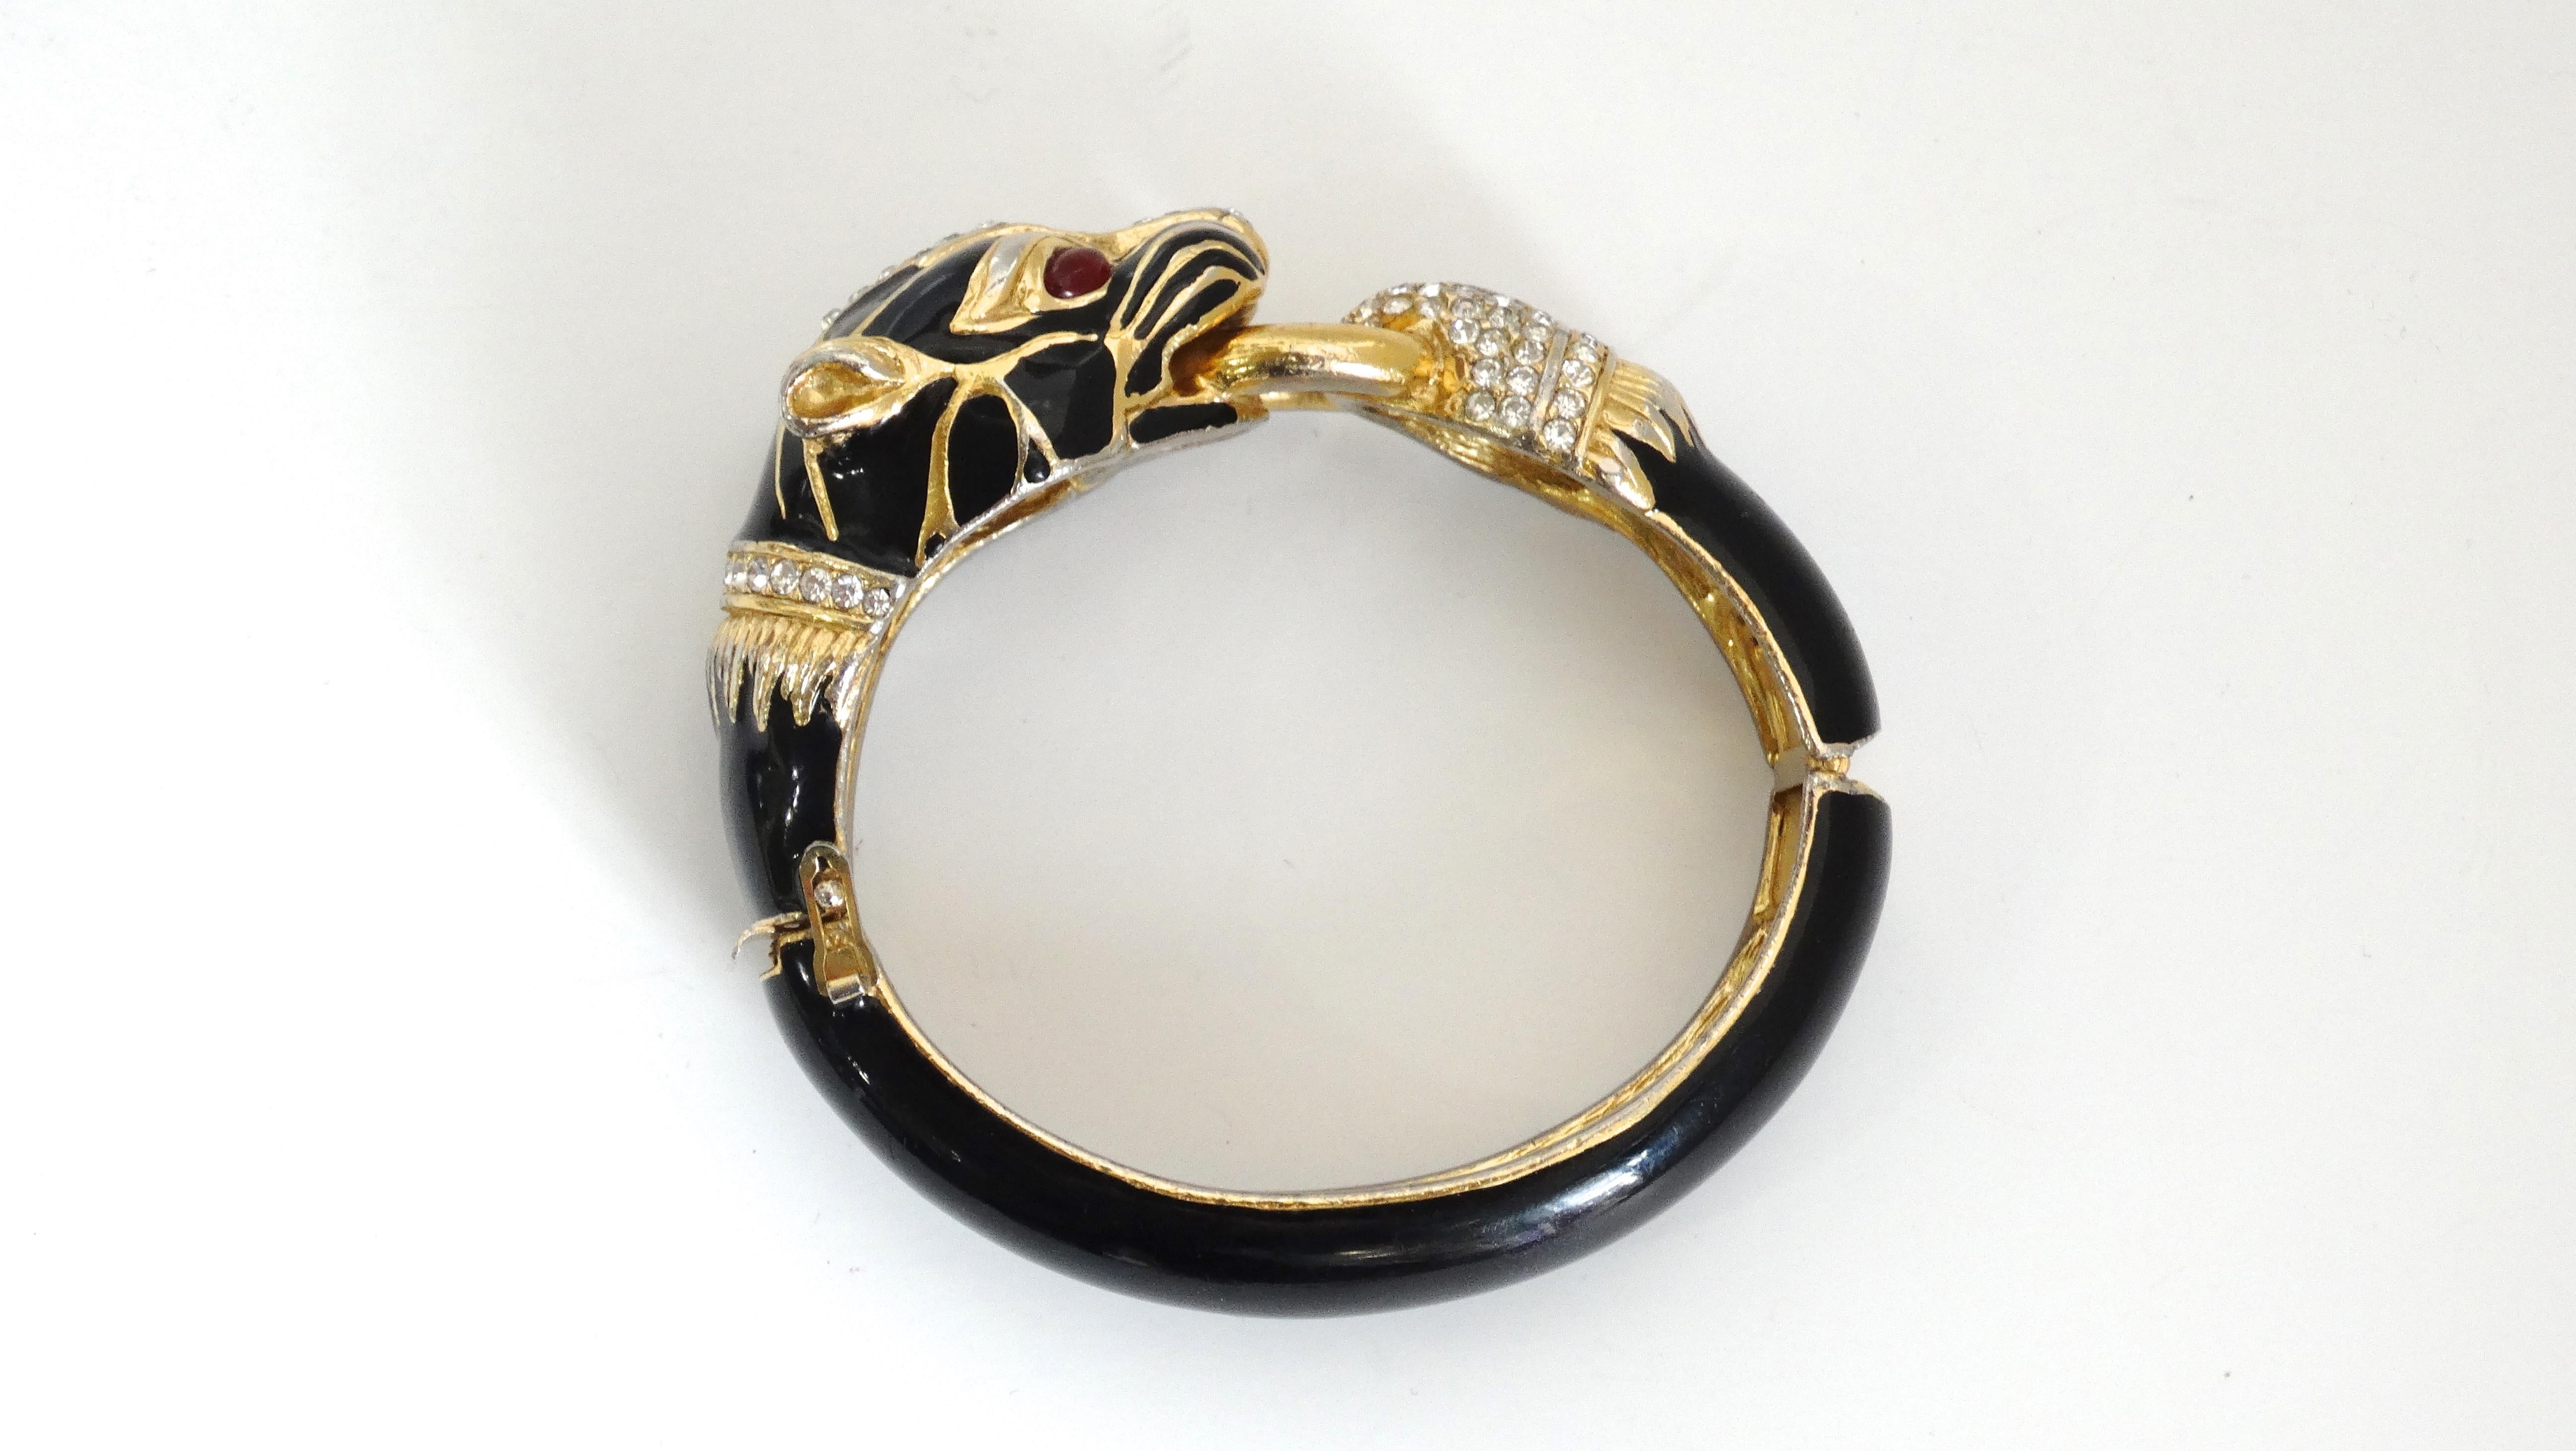 Spice up your bracelet game with this amazing Ciner bracelet! Circa 1970s, this Ciner gold plated bracelet is finished in a black enamel and features a detailed panther knocker decorated with red glass eyes and crystals. Hinge closure.The perfect